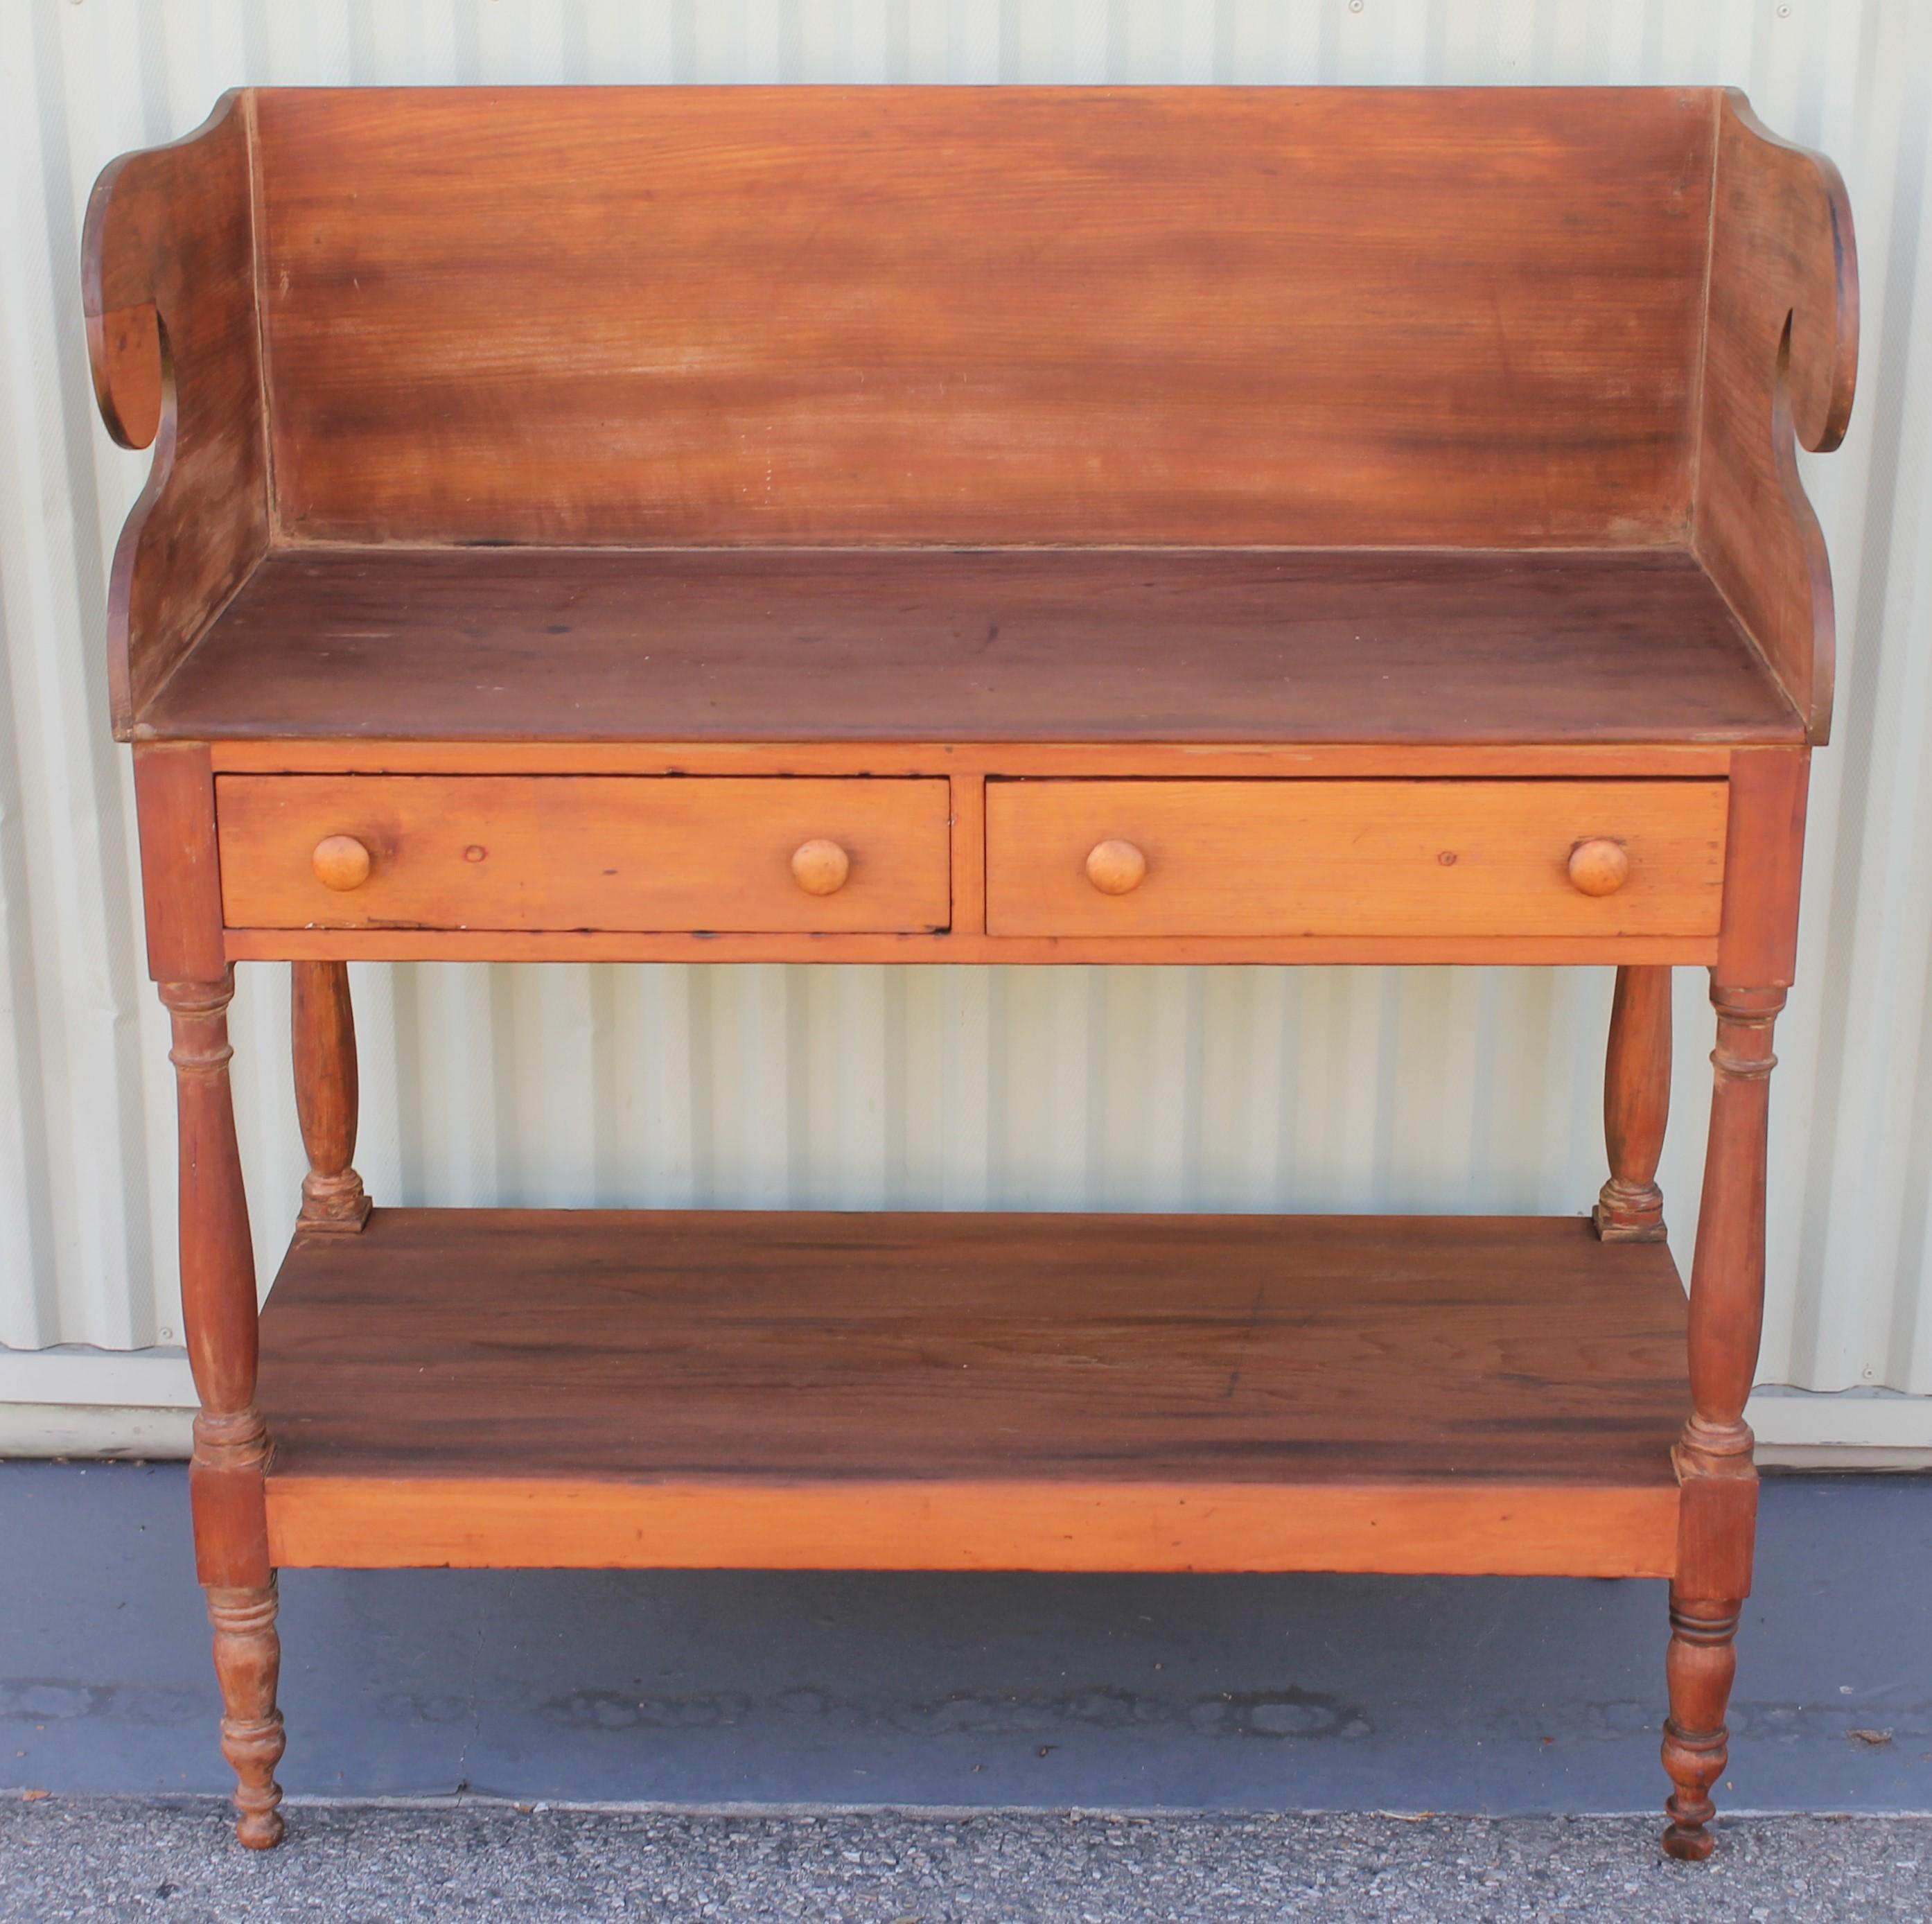 This fine and early side table has wonderful cut-out and dovetailed case and drawers. Fantastic form and condition. Great side table or serving table in a dining room.